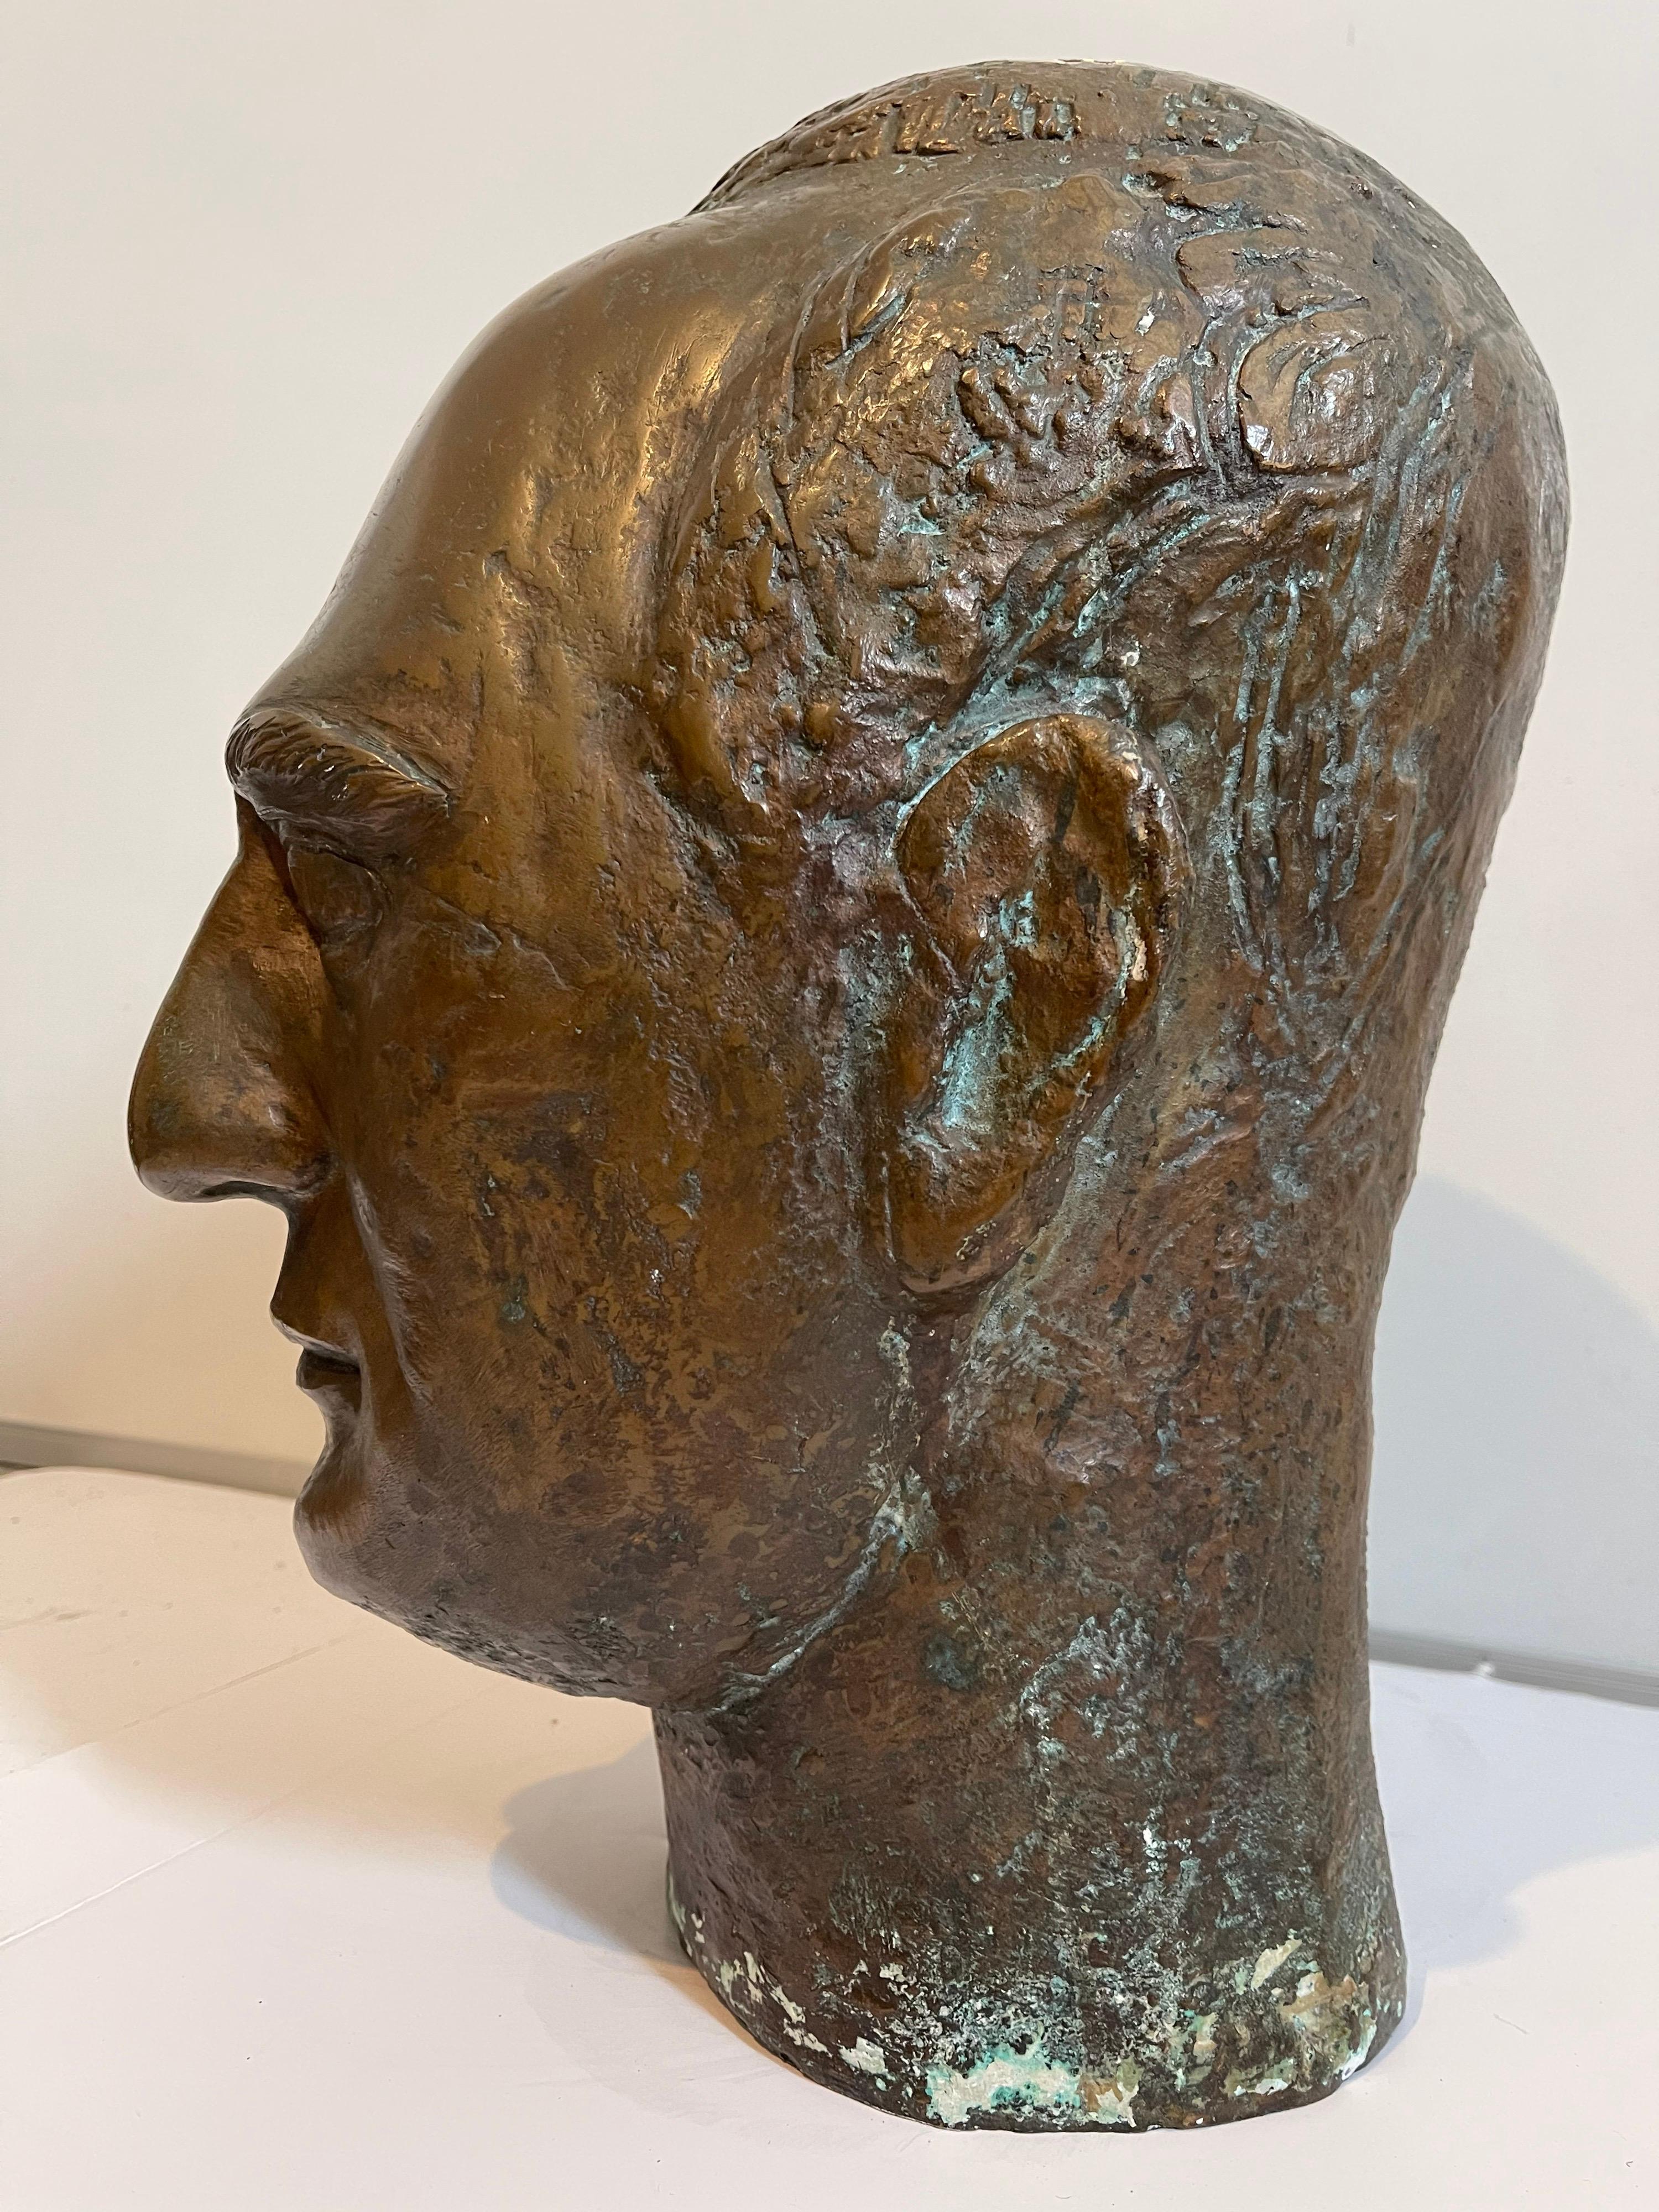 Minna Rothenberg Harkavy (1895-1987) Estonian-American
This is not signed
bronze portrait bust
Provenance: Estate of the artist by descent

Minna Harkavy (1887 – 1987) (birth occasionally listed as 1895) was a Jewish American sculptor born in